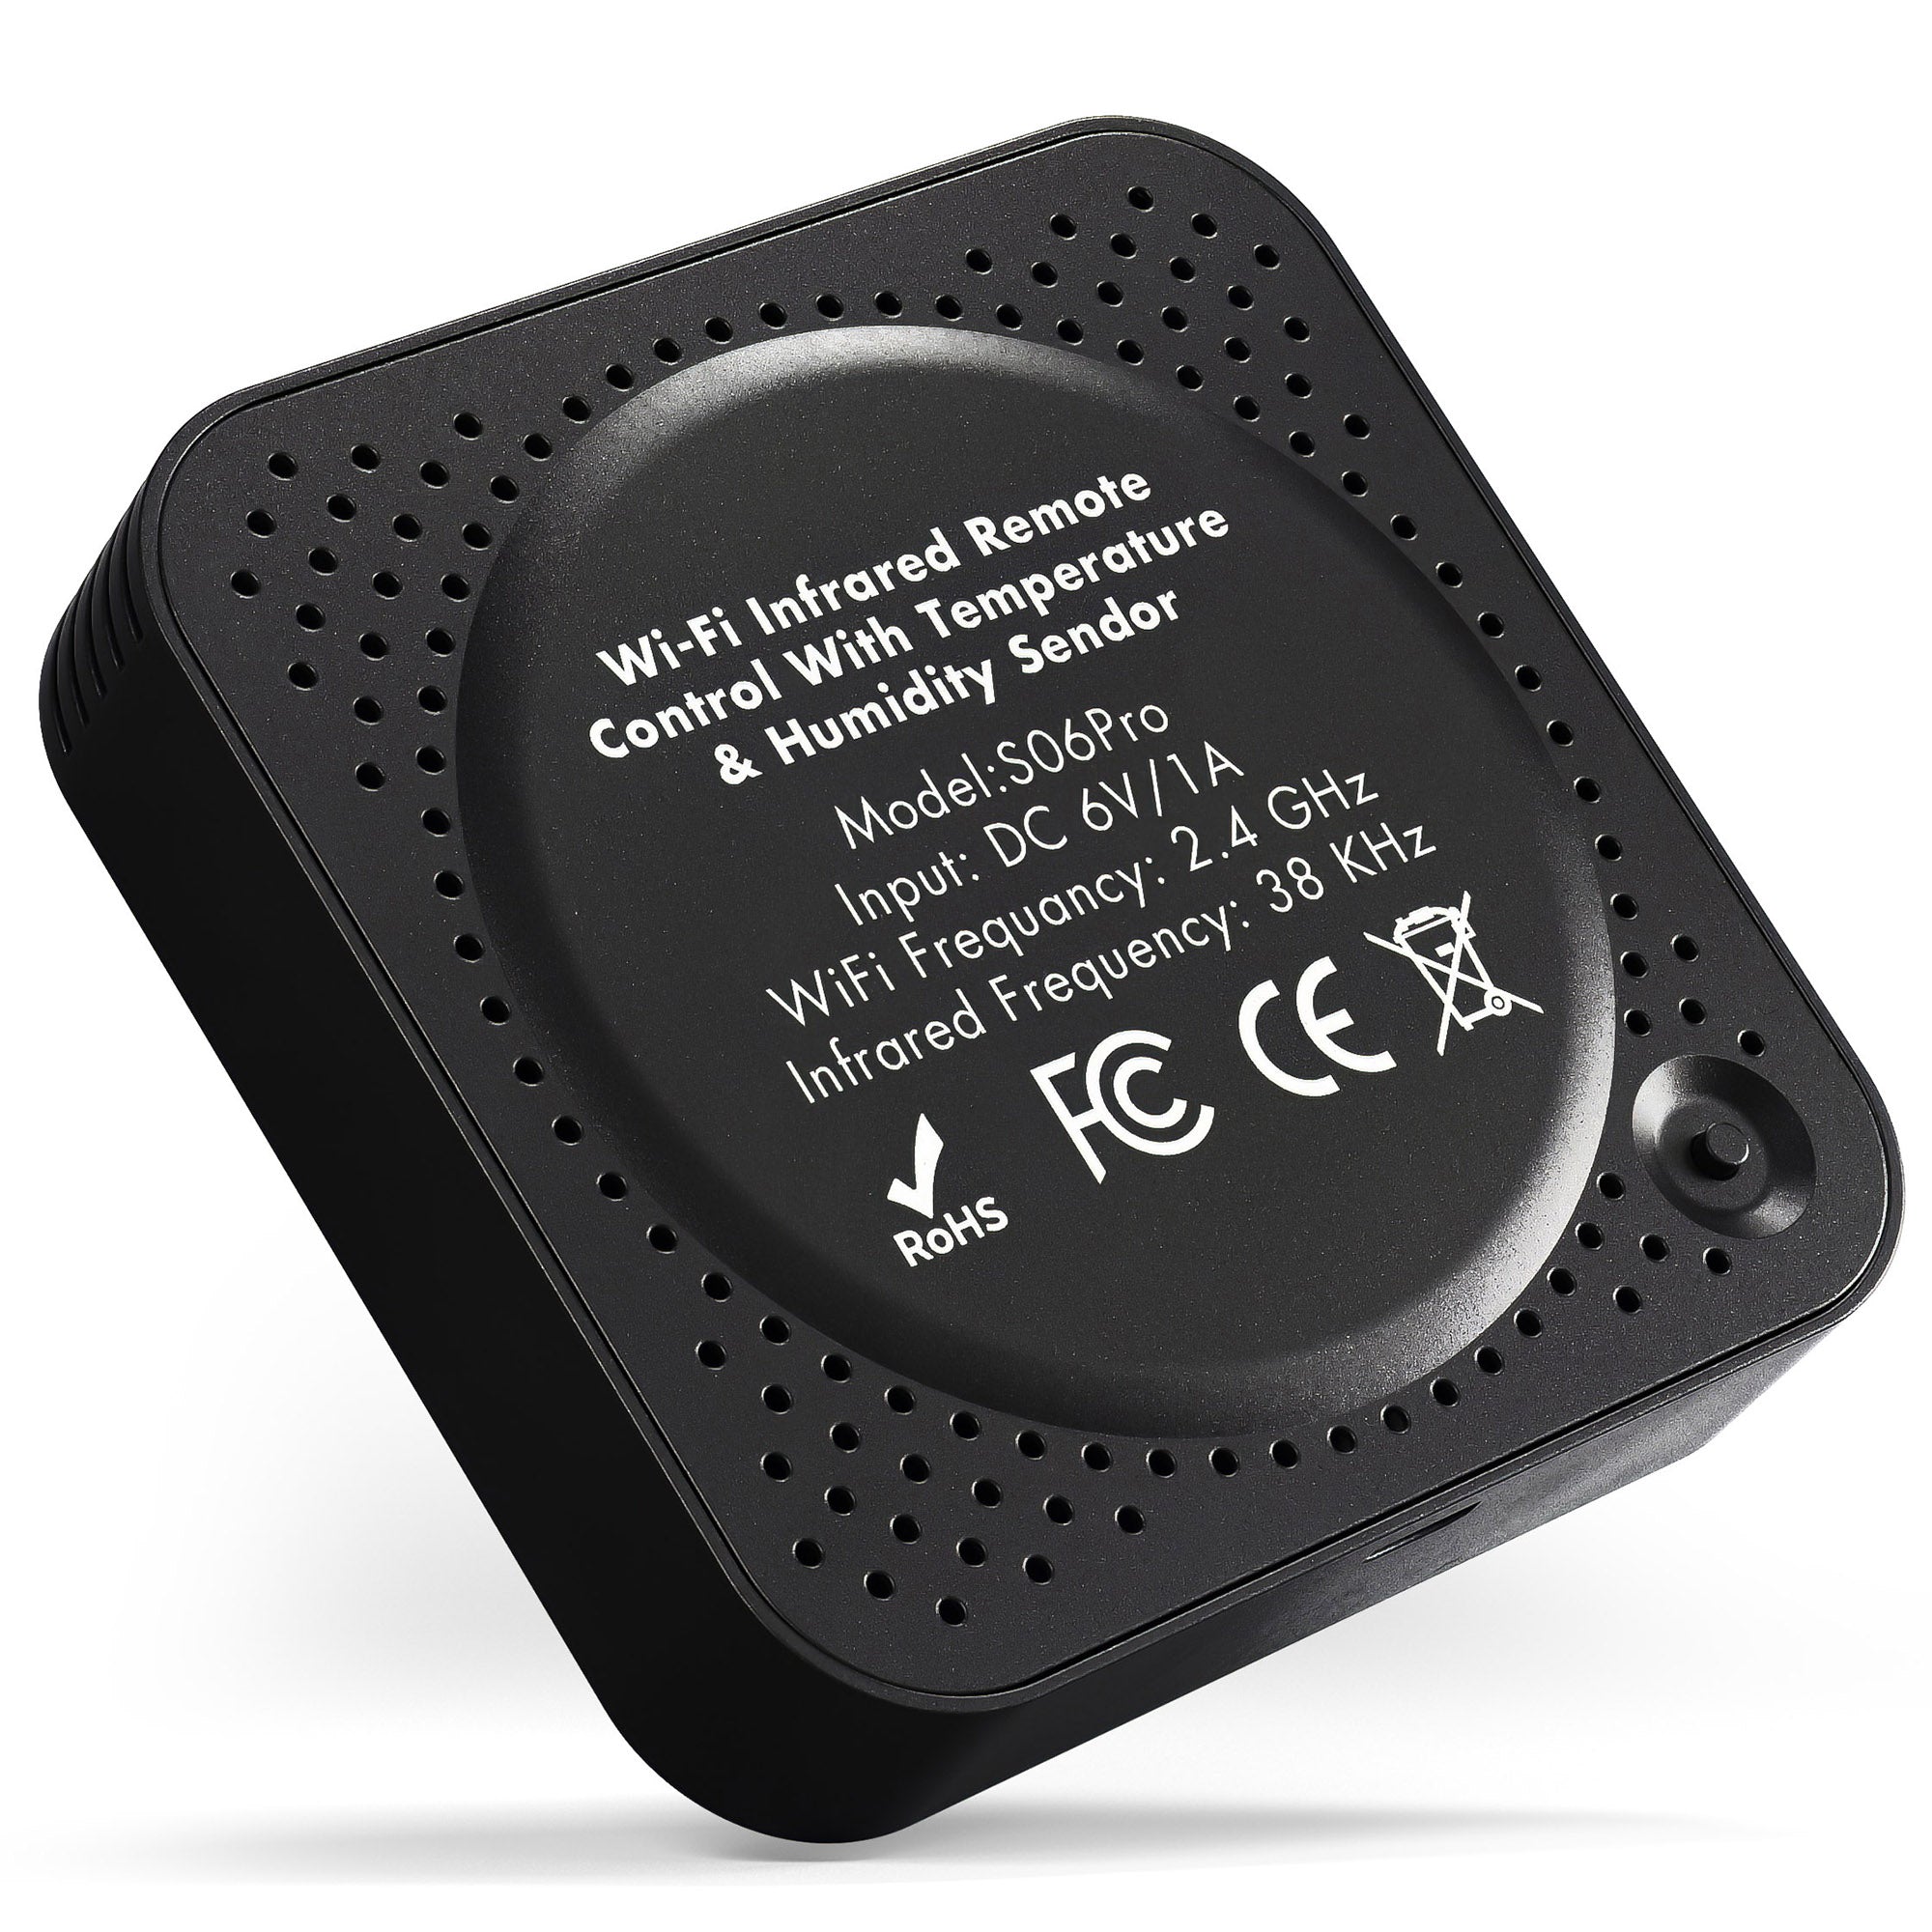 Smart IR Remote, Wi-Fi Controller for devices with remote controls